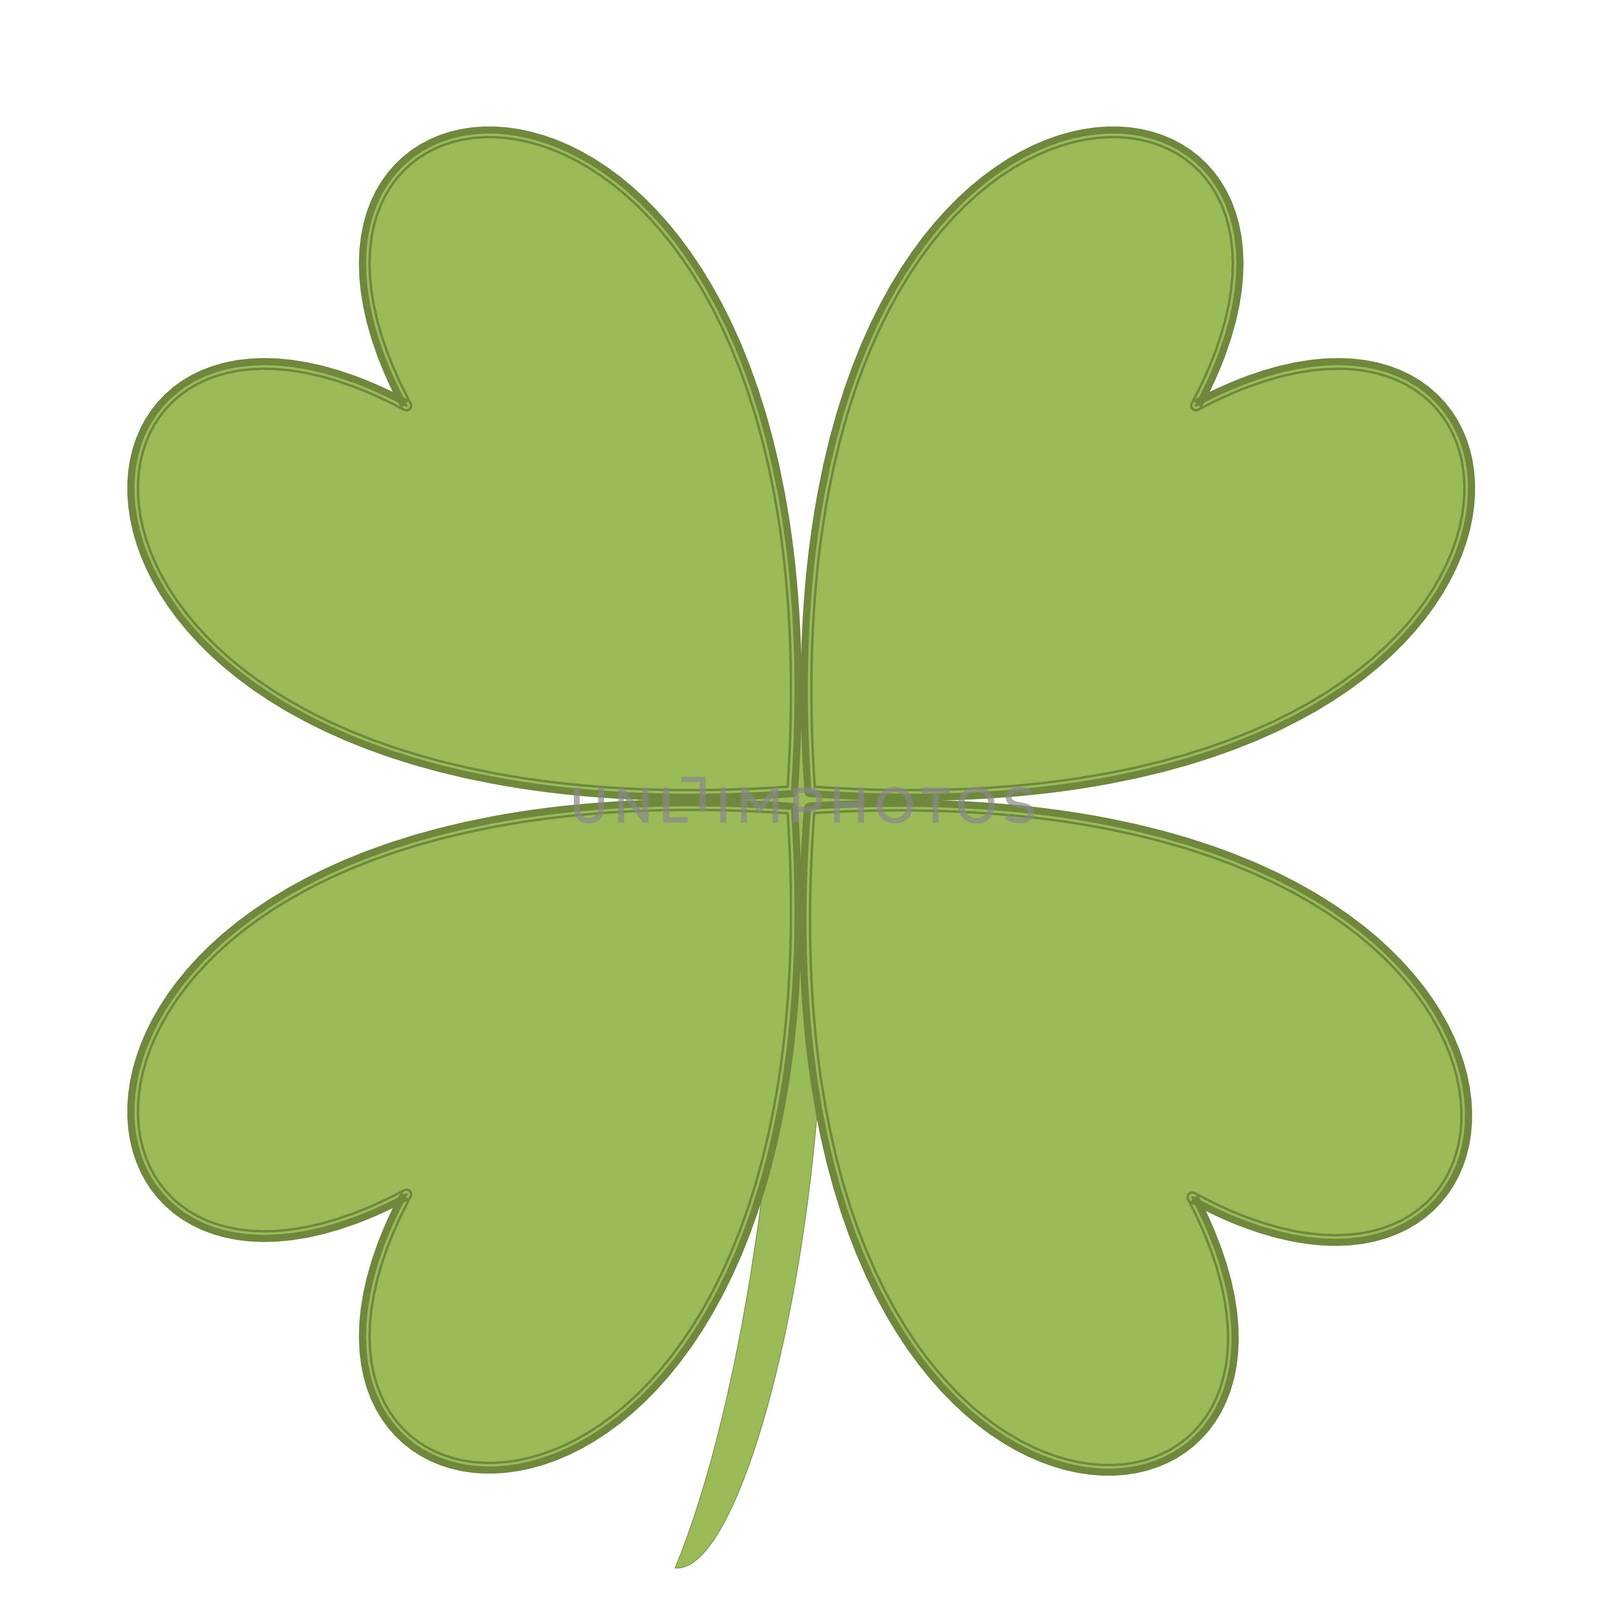 Four leaves clover in green color background